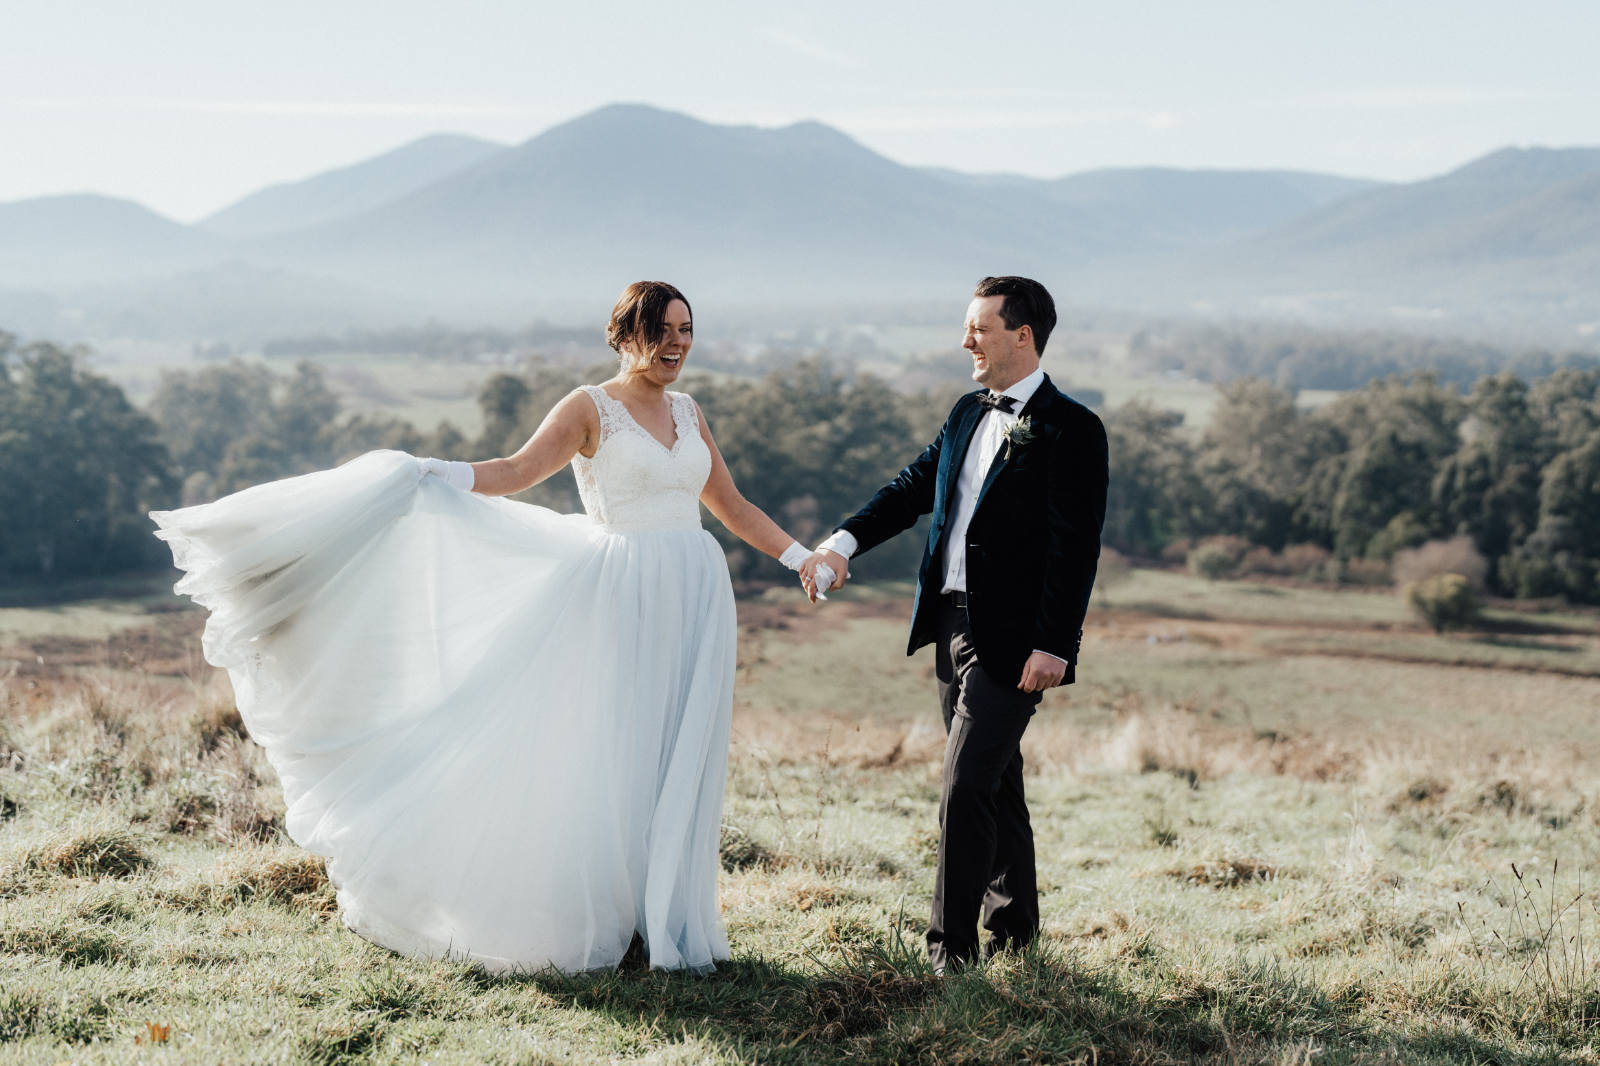 Winter vintage aesthetic for Ashleigh and Nathan at their Riverstone Estate wedding in the Yarra Valley. Photos by Rick Liston.